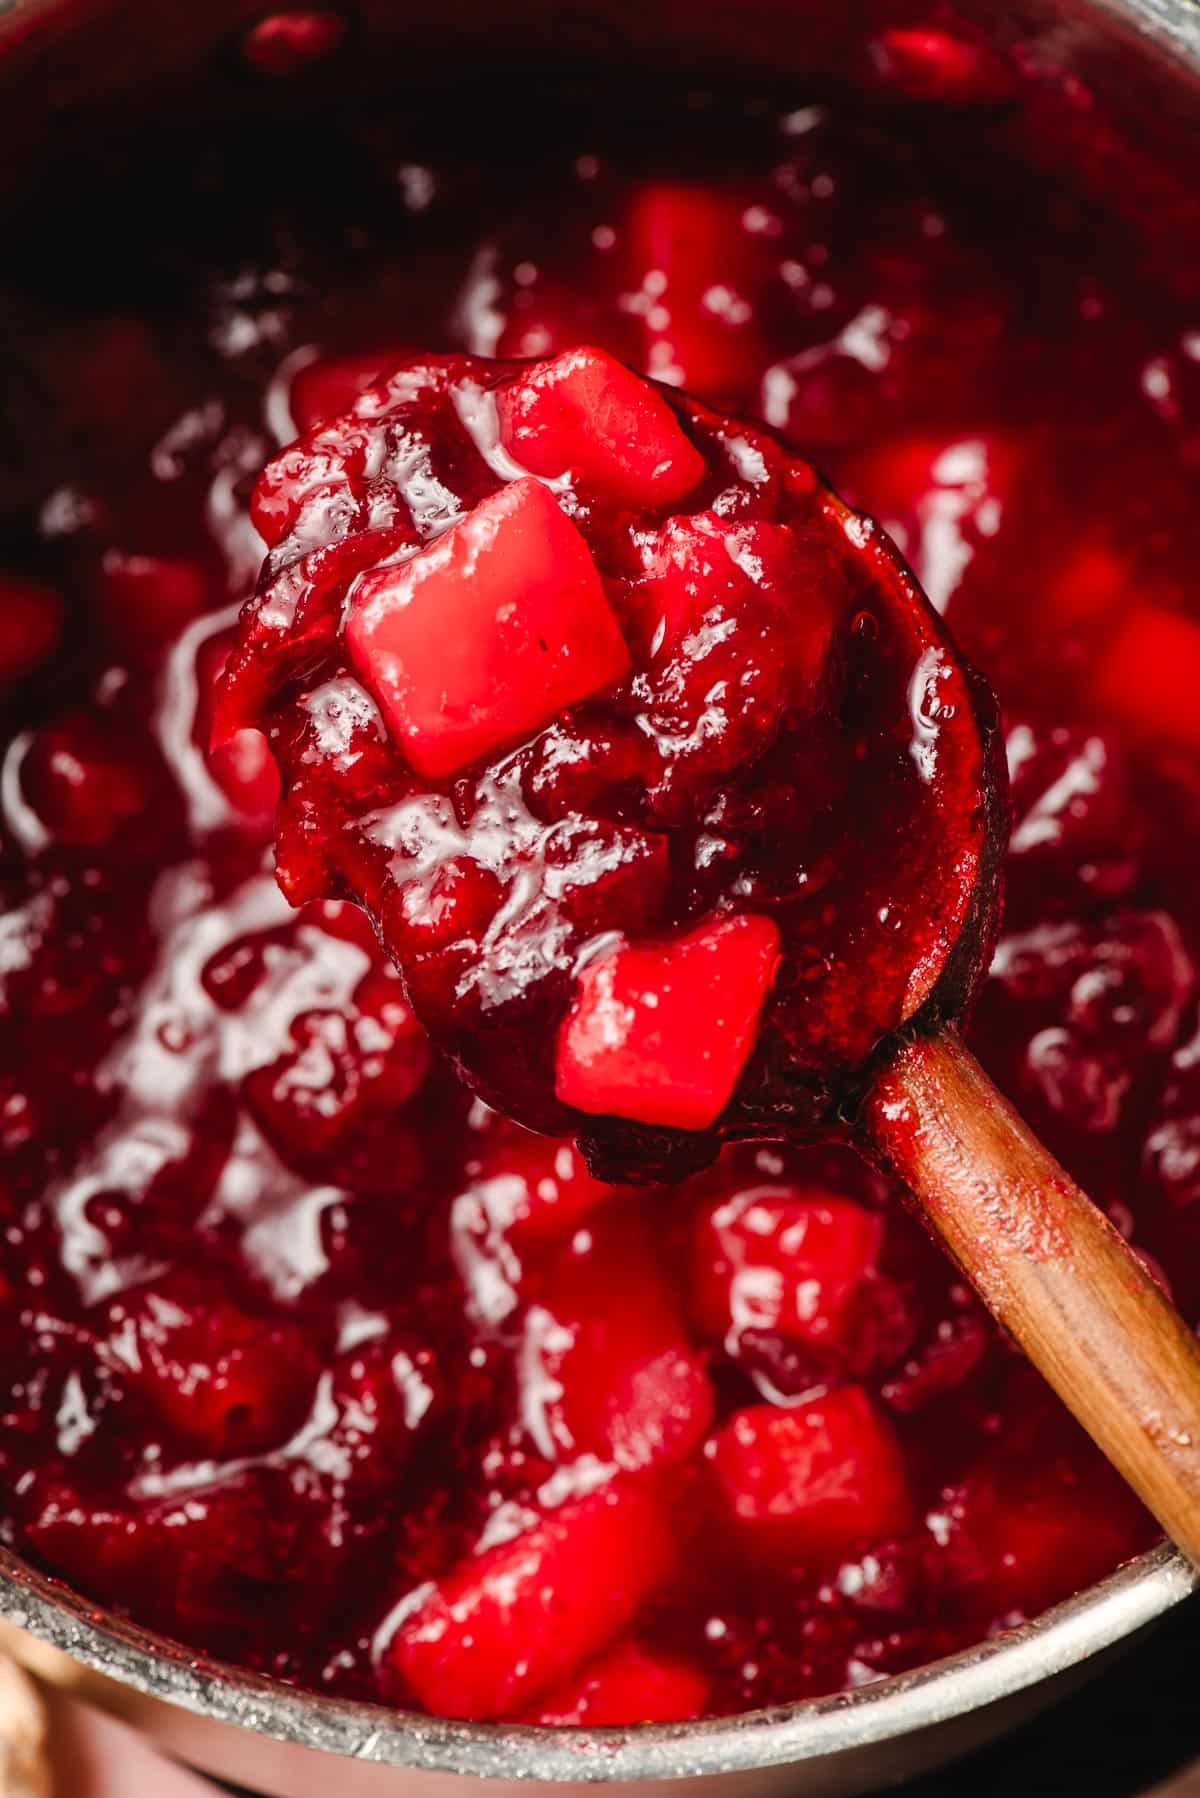 Wooden spoon scooping up homemade cranberry pear sauce from a saucepan.